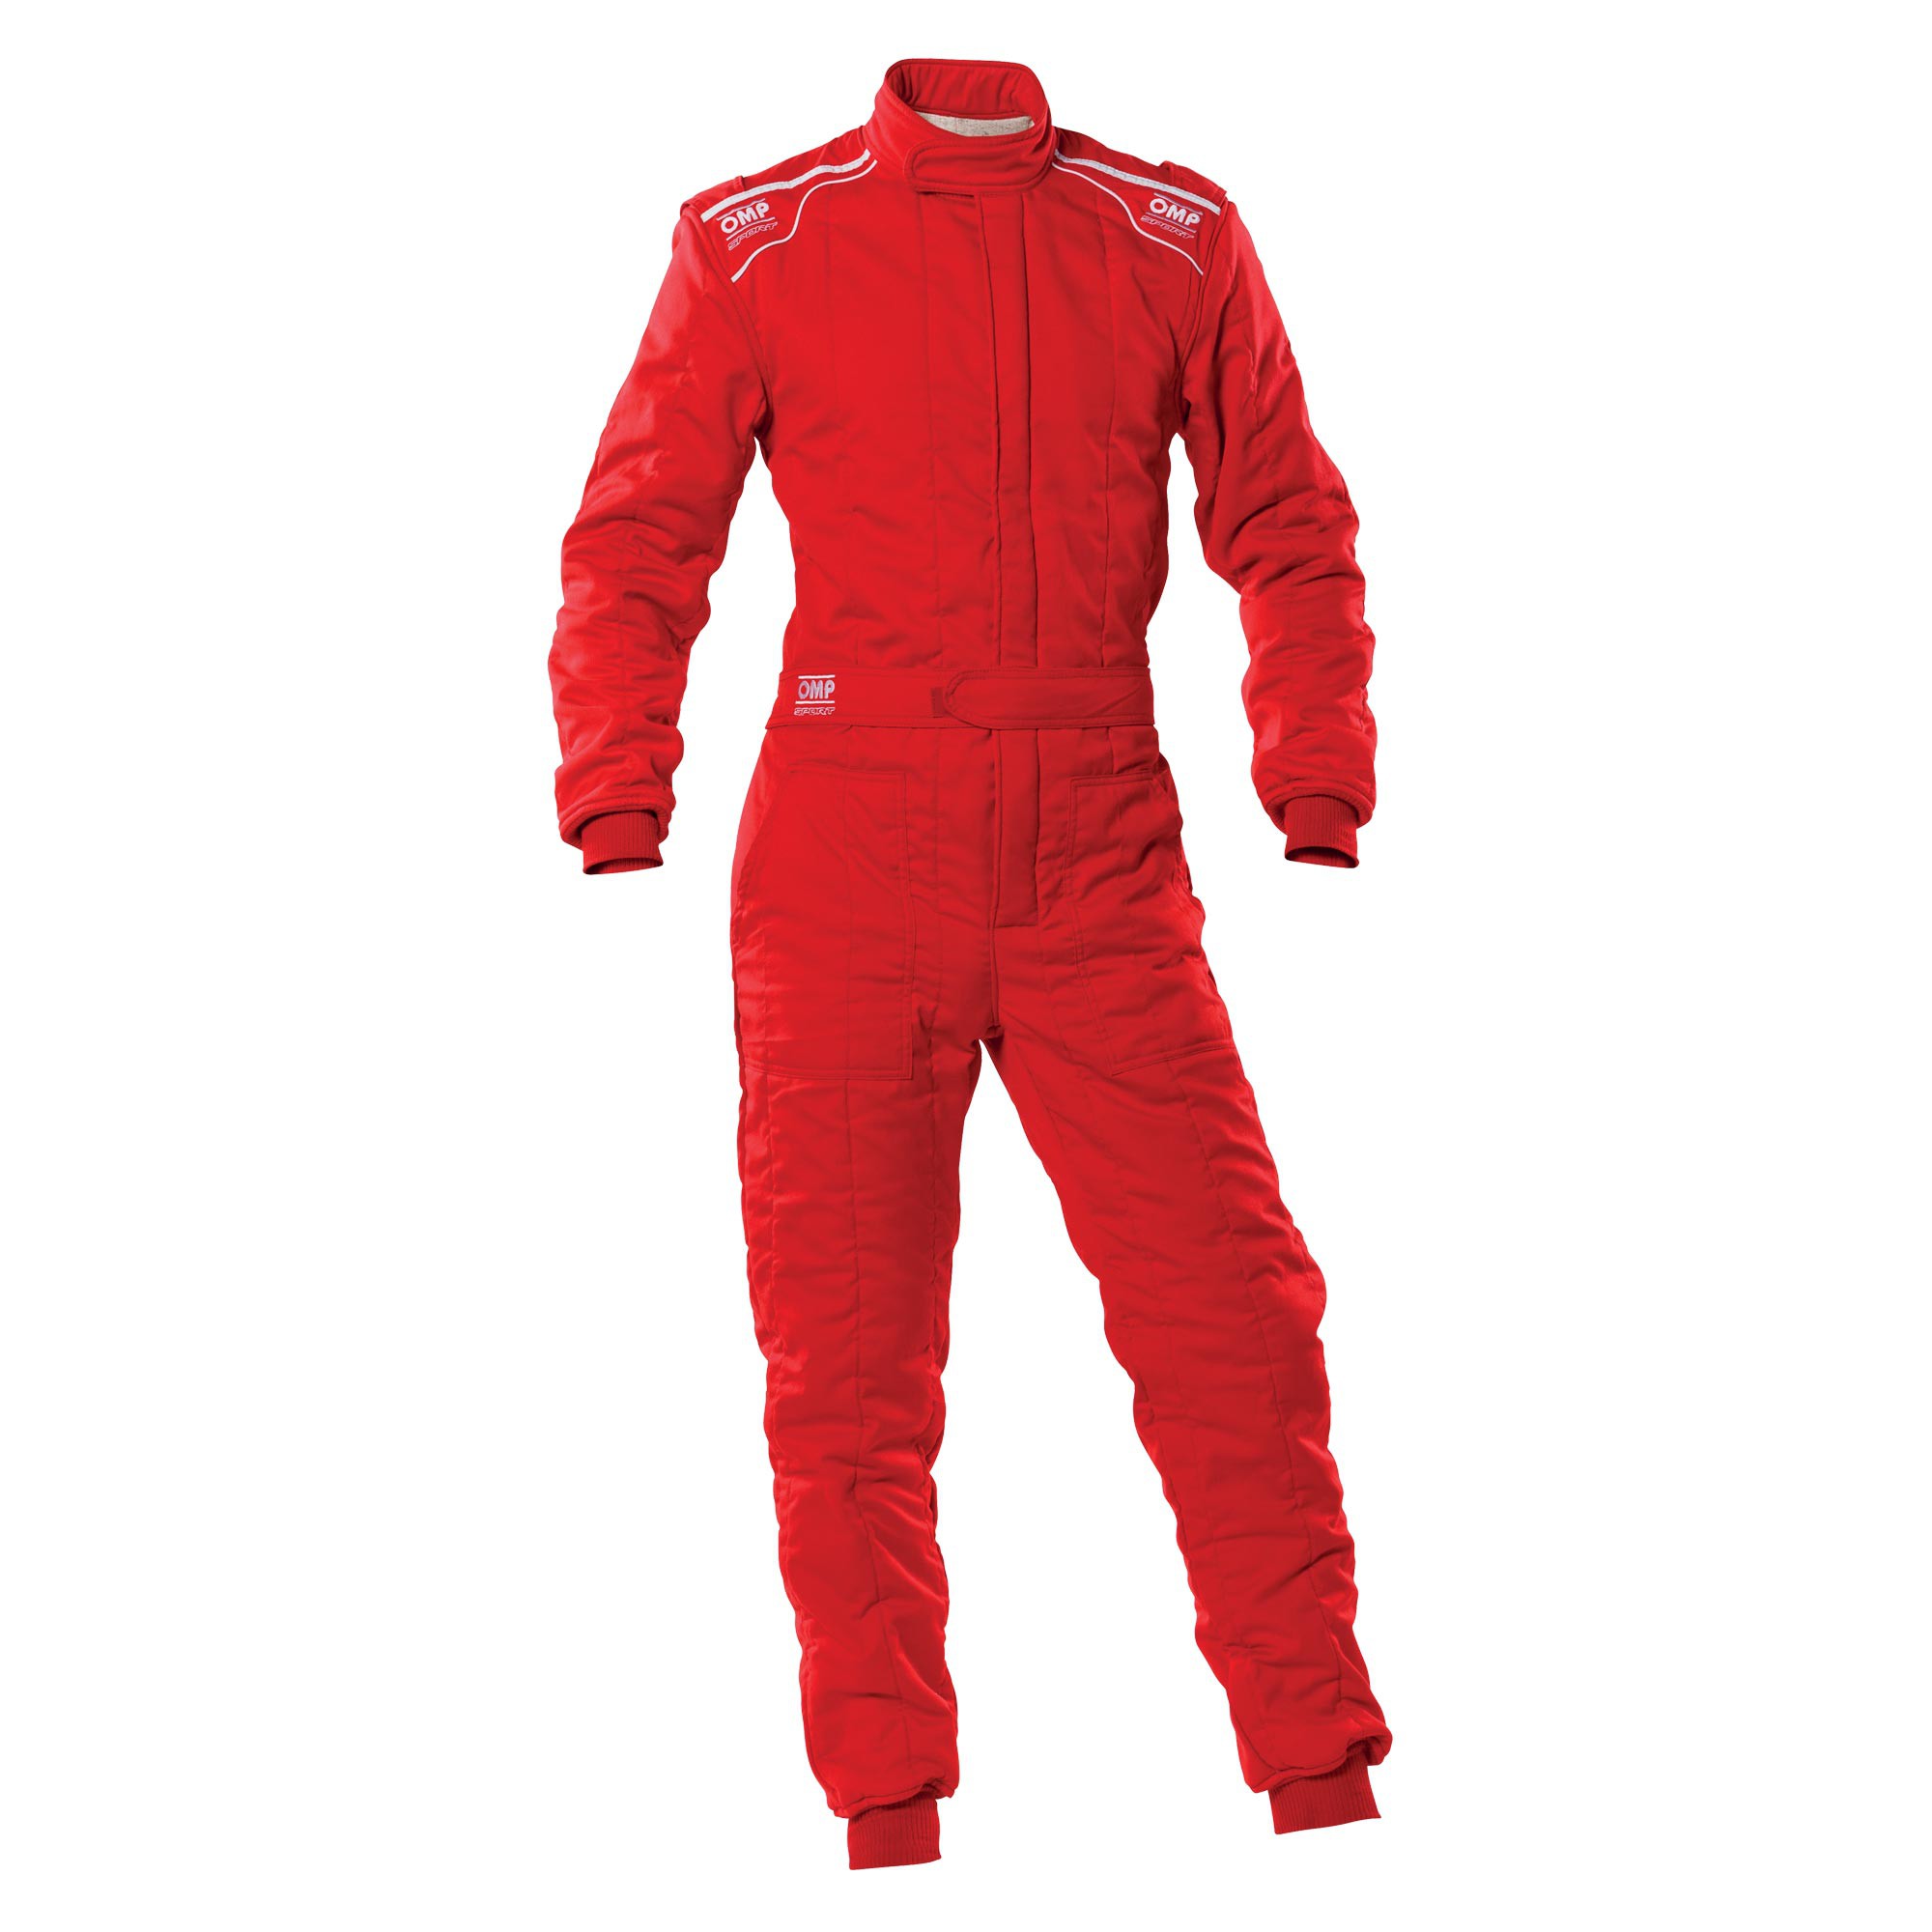 OMP SPORT OVERALL RED SIZE L FIA 8856-2018